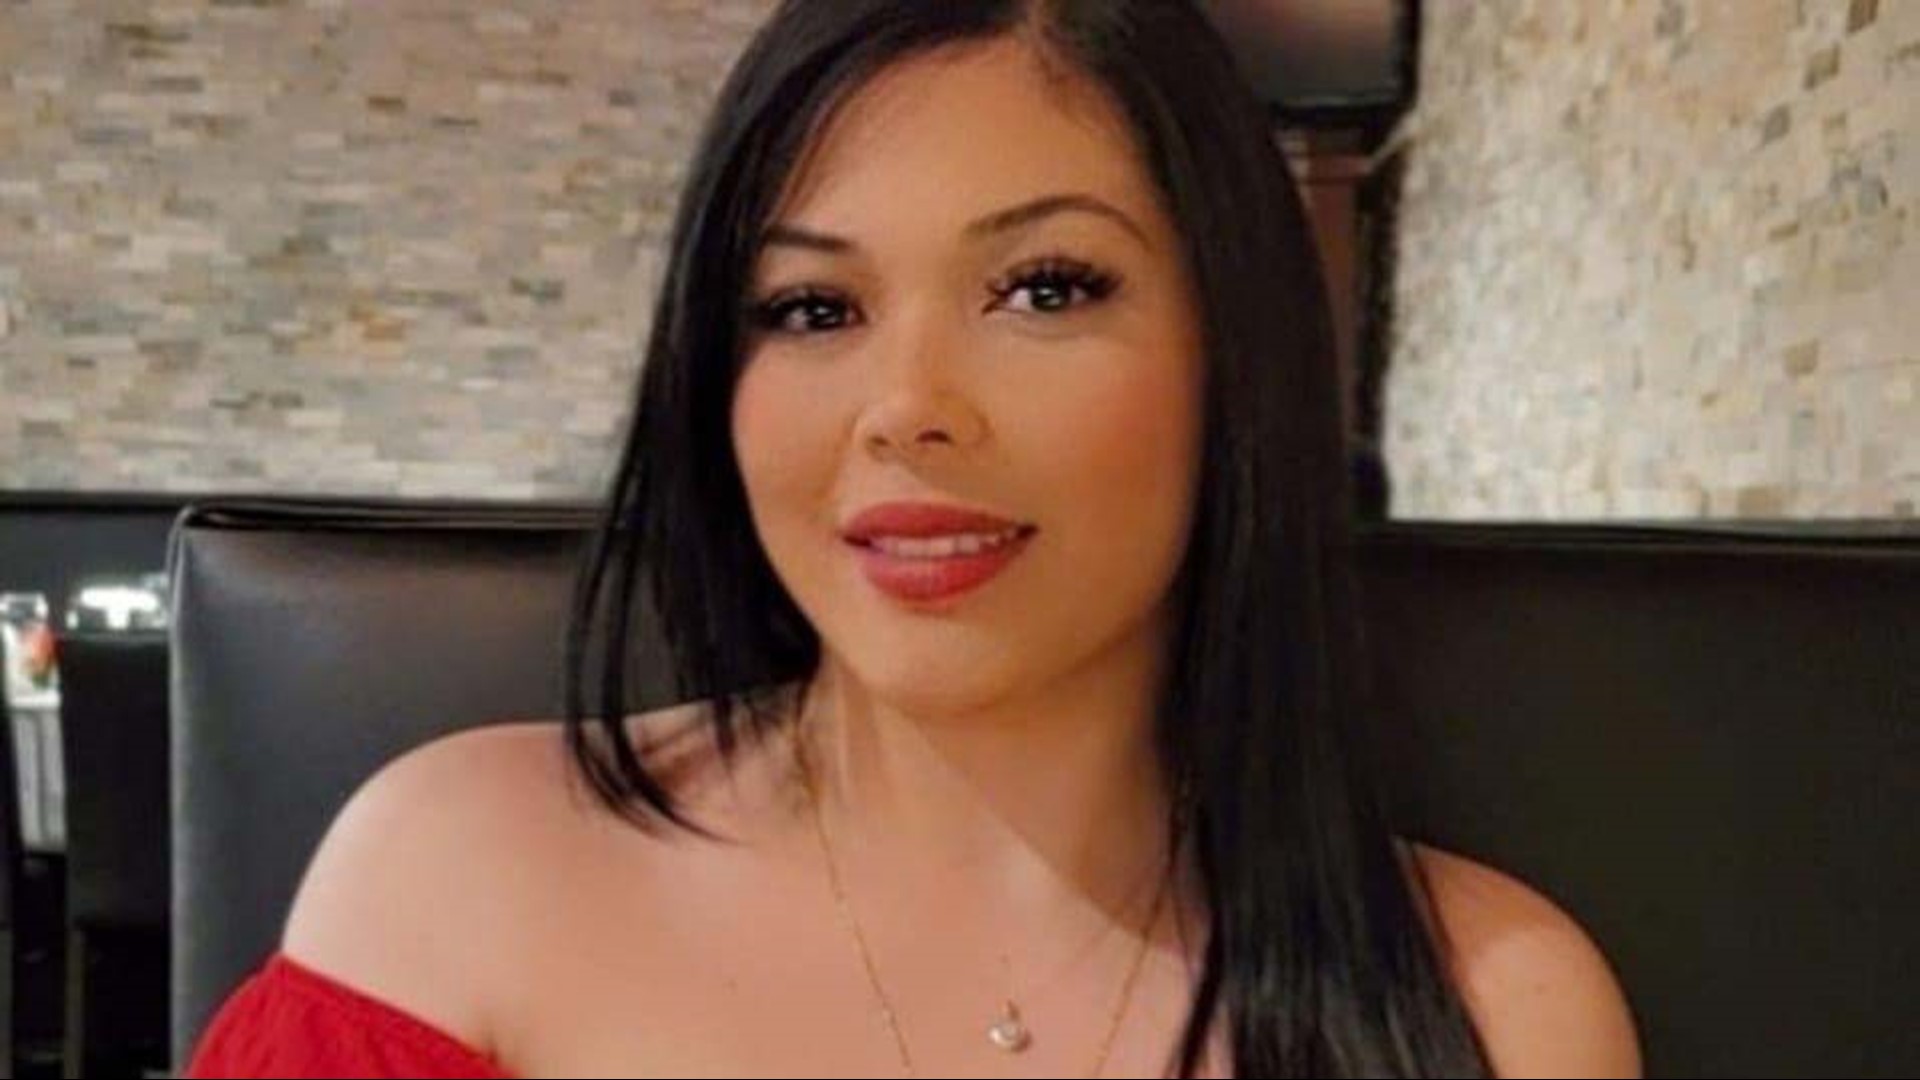 Family members identified the woman killed in the apparent murder-suicide outside Texas Children's Hospital West Campus as 32-year-old Kenia Osorio